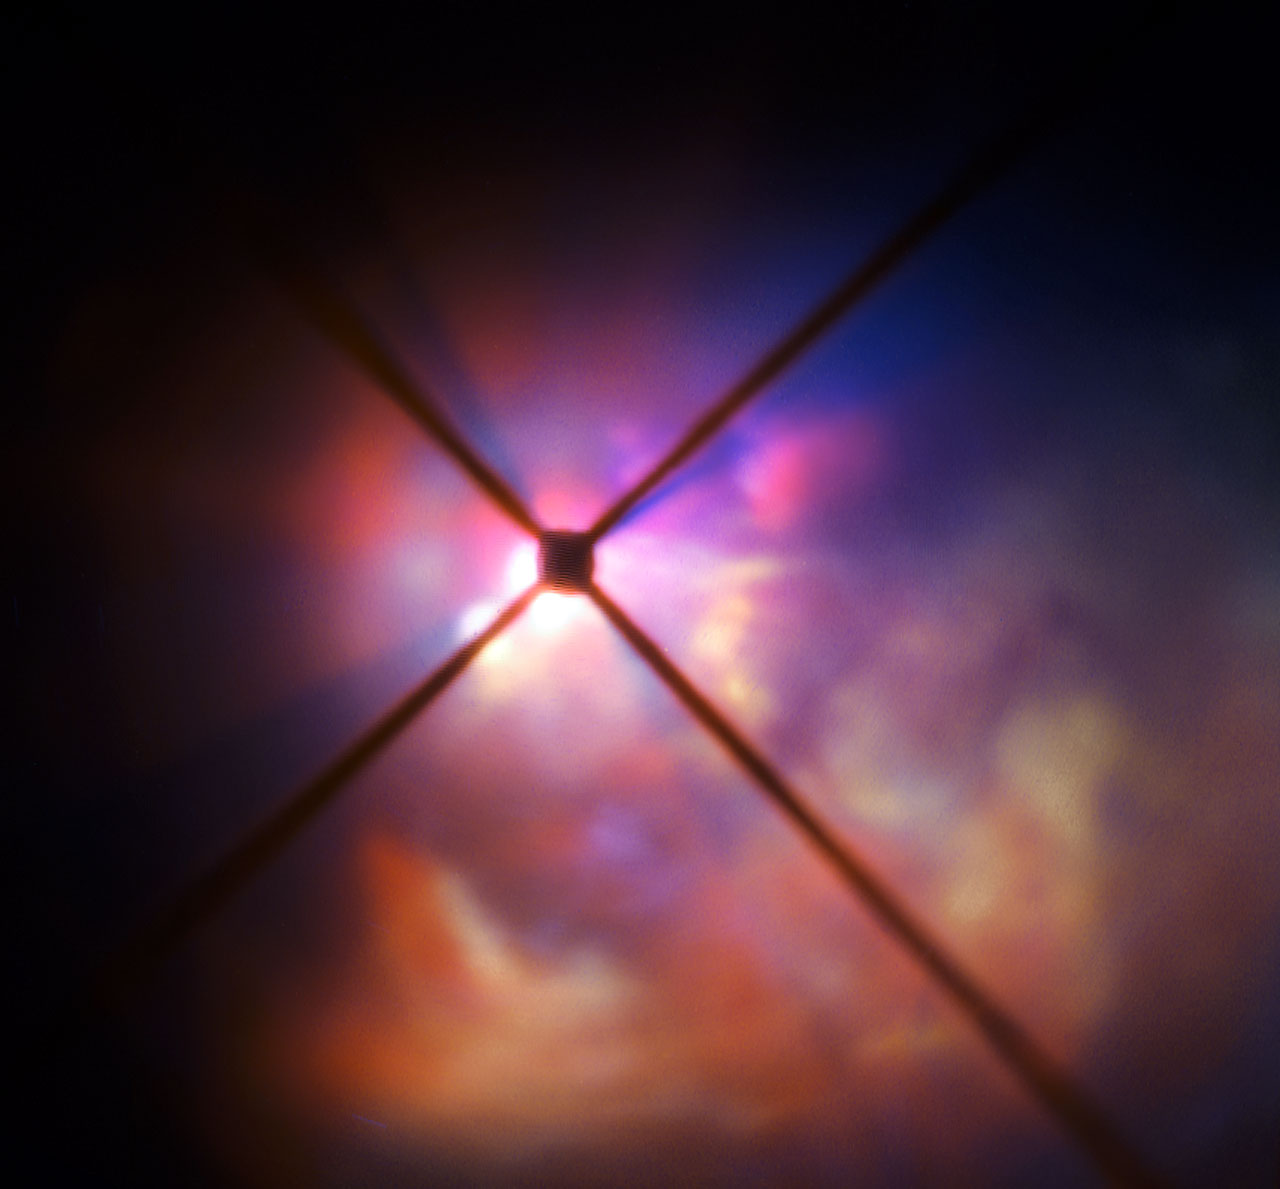 VLT image of the surroundings of VY Canis Majoris seen with SPHE